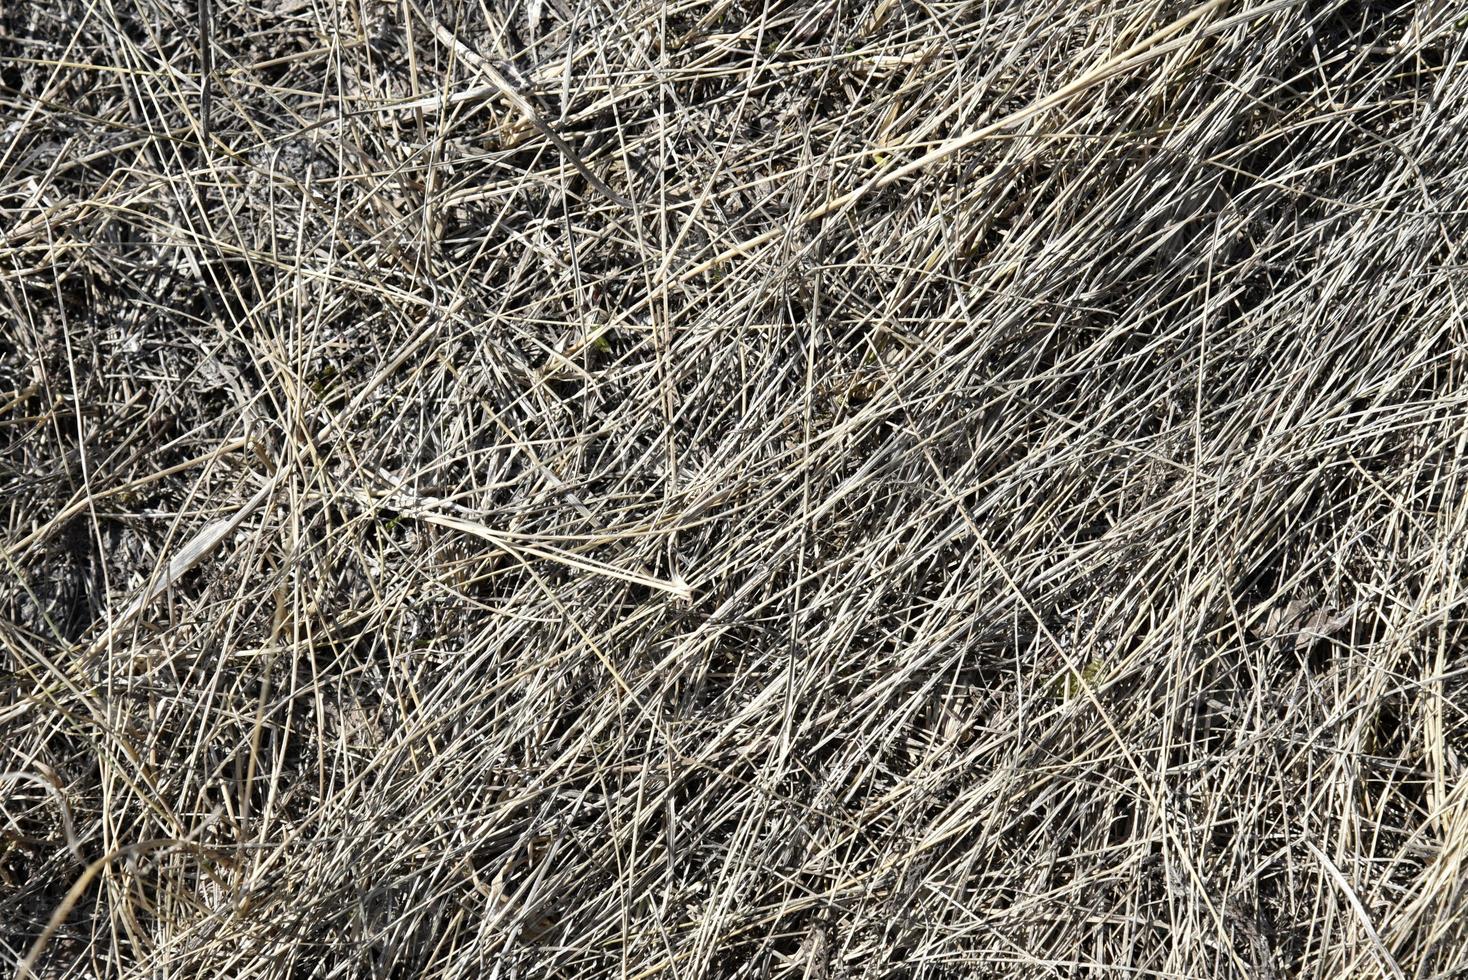 Dry and rotten grass in the spring at the landfill photo